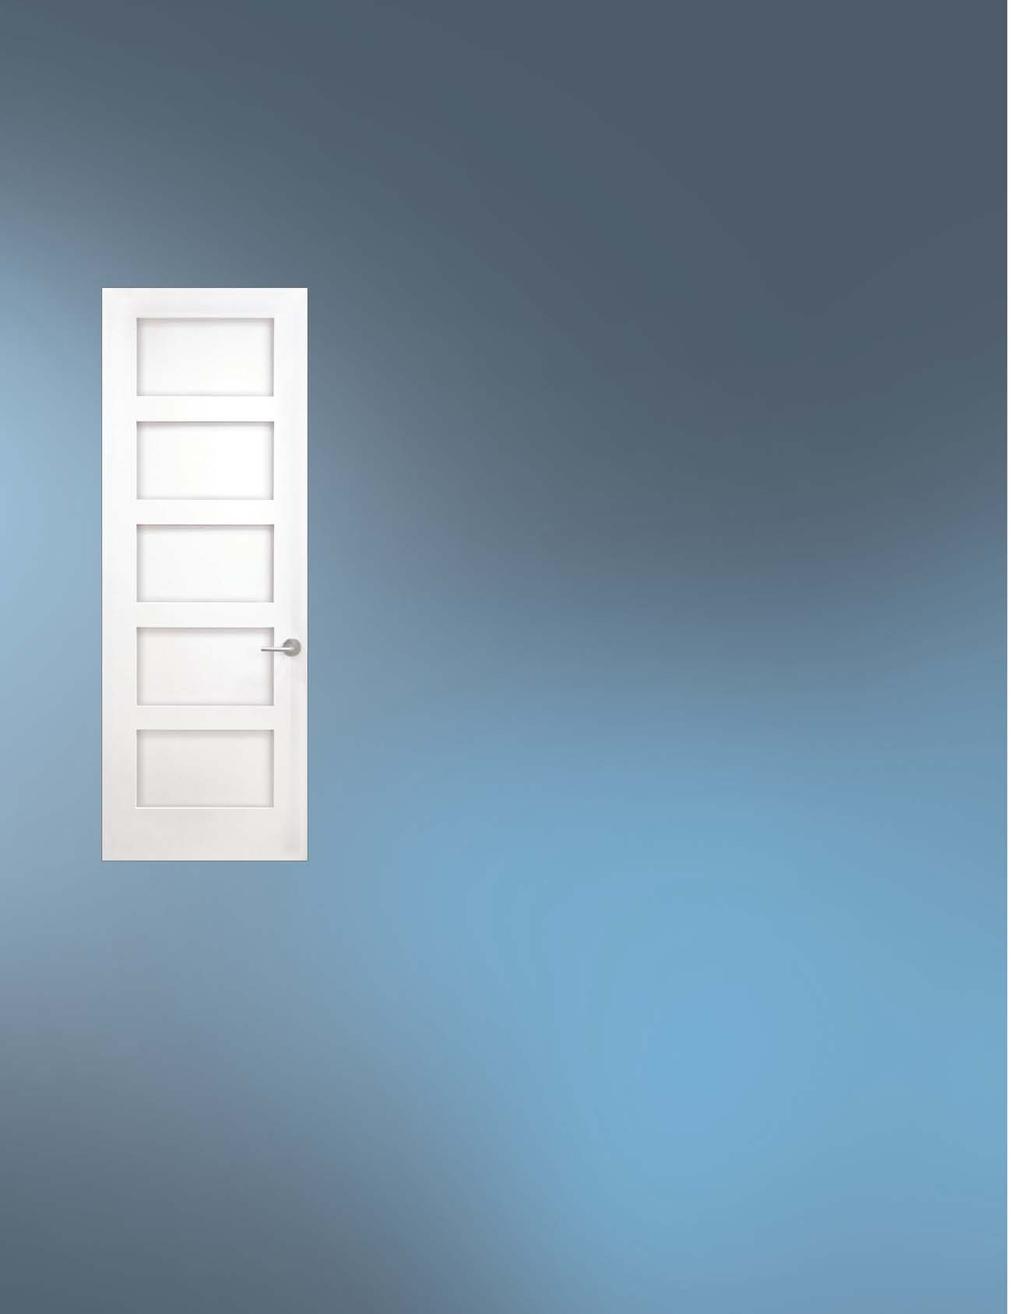 FIVE PANEL E5000 E5010 All doors are available in widths from 1 0 to 3 6 by 6 8, 7 0 and 8 0 tall. Thicknesses 1 3/8, 1 3/4 and 2 1/4. All panels can be replaced with glass.